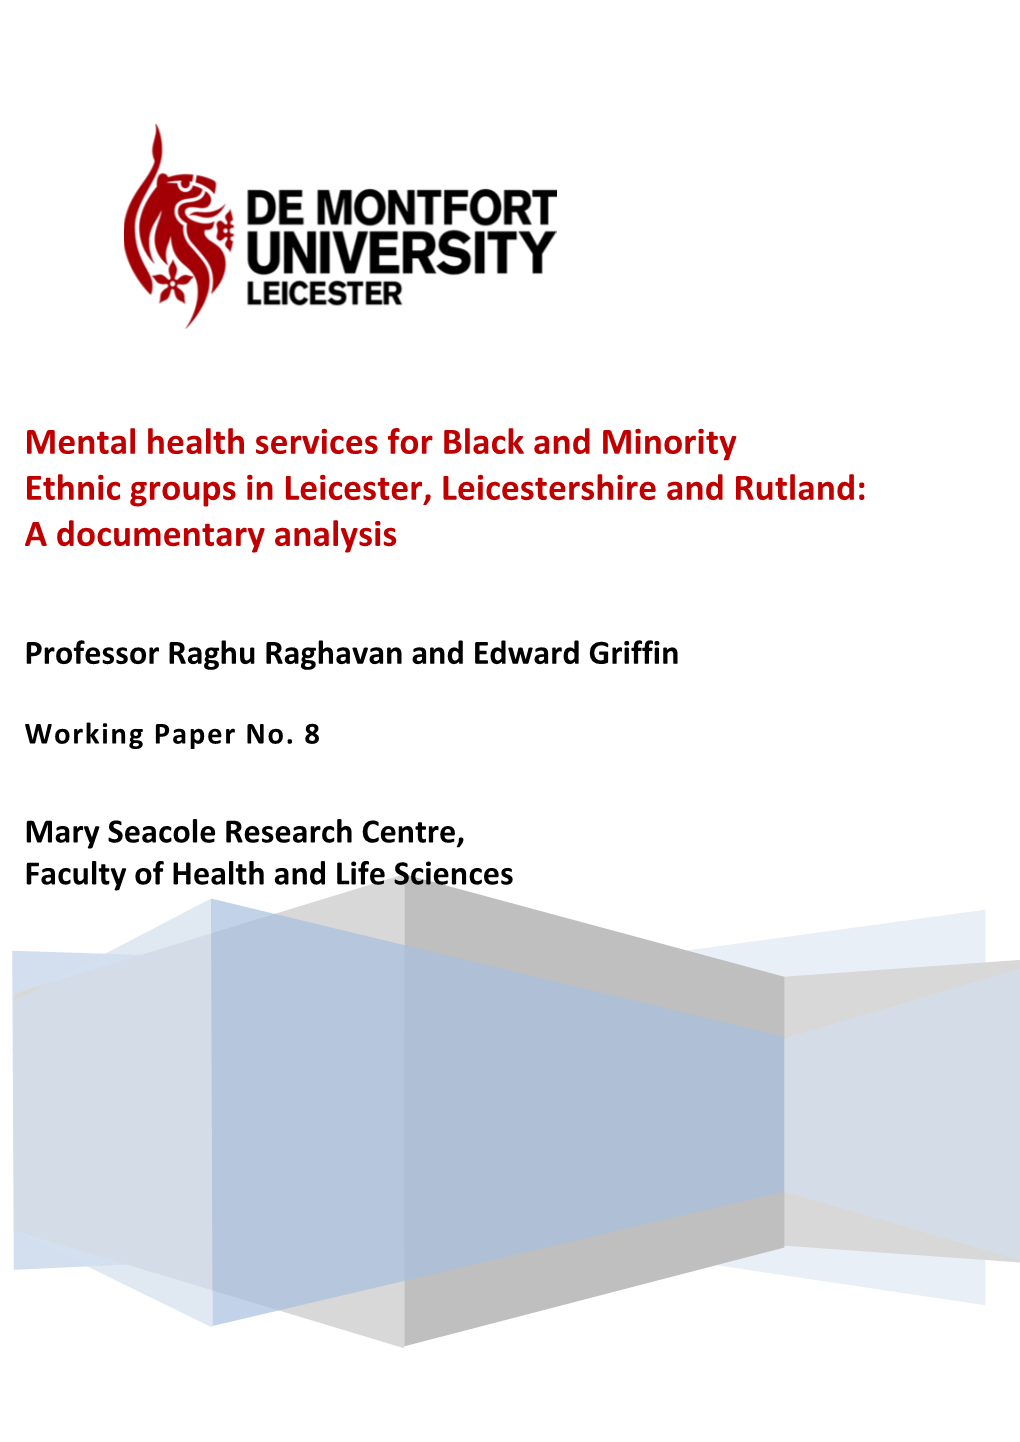 Mental Health Services for Black and Minority Ethnic Groups in Leicester, Leicestershire and Rutland: a Documentary Analysis